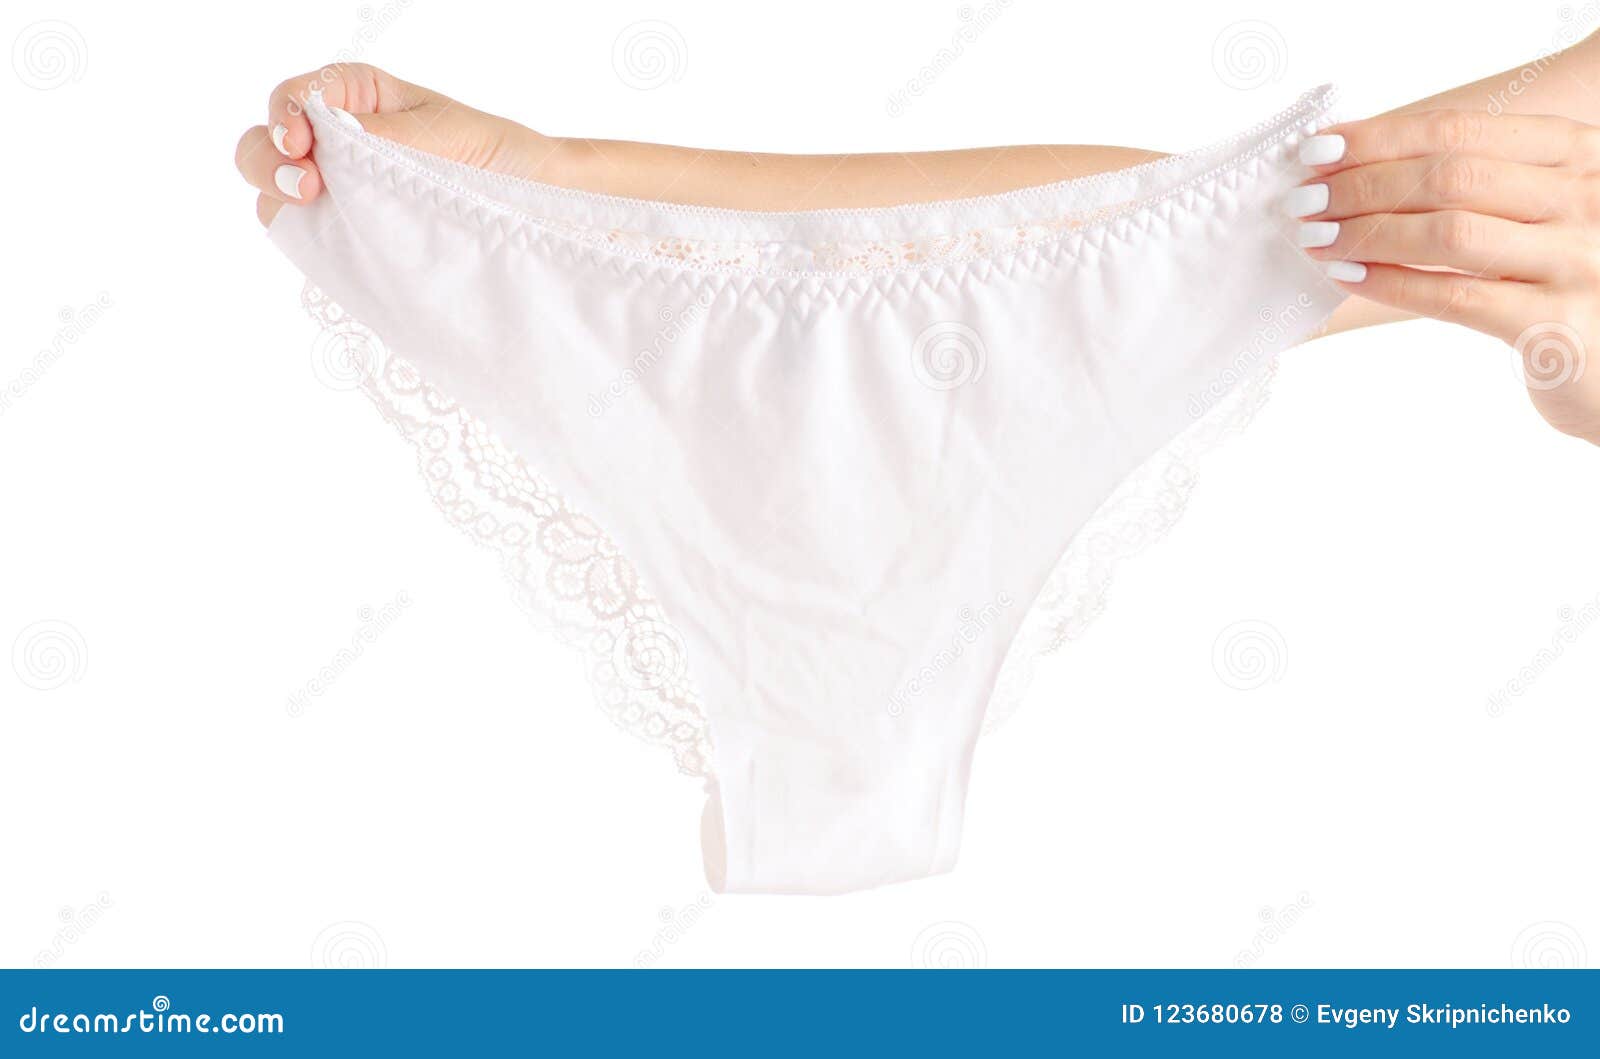 The White Female Panties in Hand Lace Stock Photo - Image of closeup ...